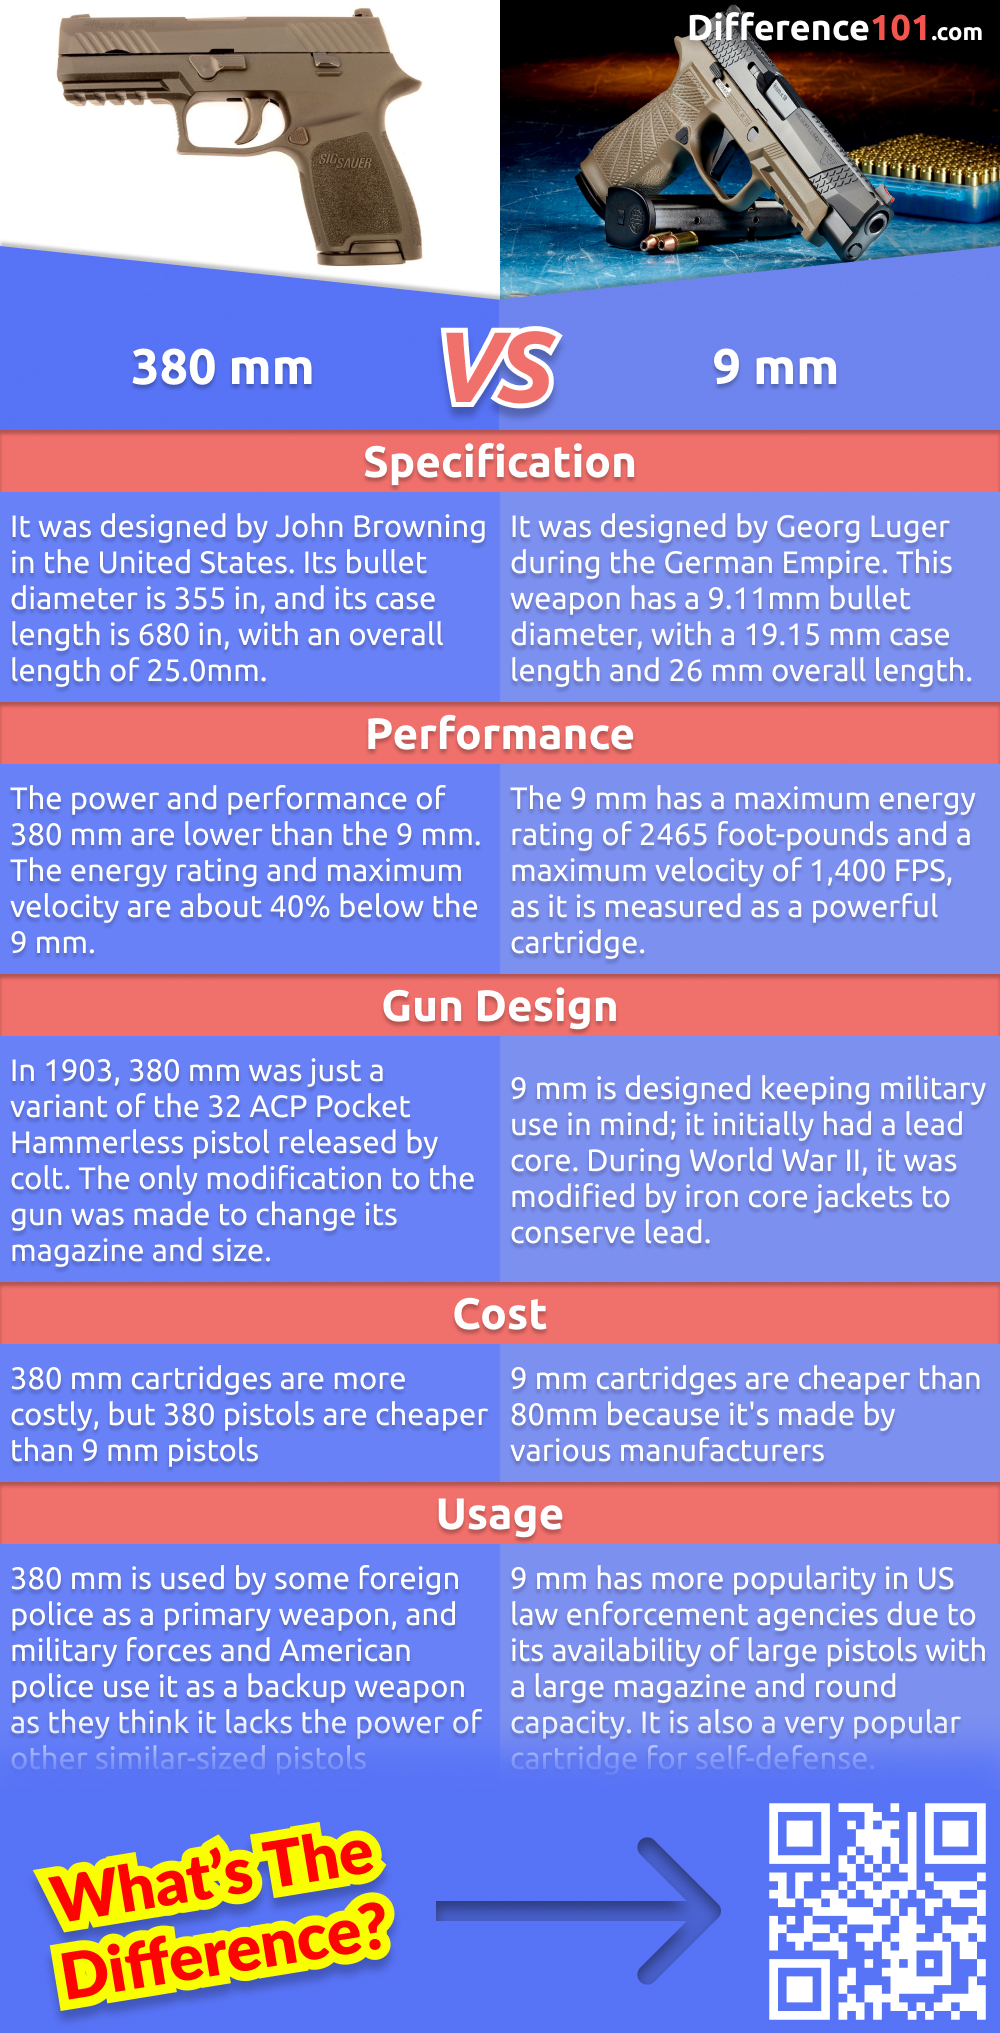 9 mm and 380 mm are the two most popular ammunition types used in firearms. But what's the difference between them? Learn about the different sizes, capacities and applications of each type of ammunition.